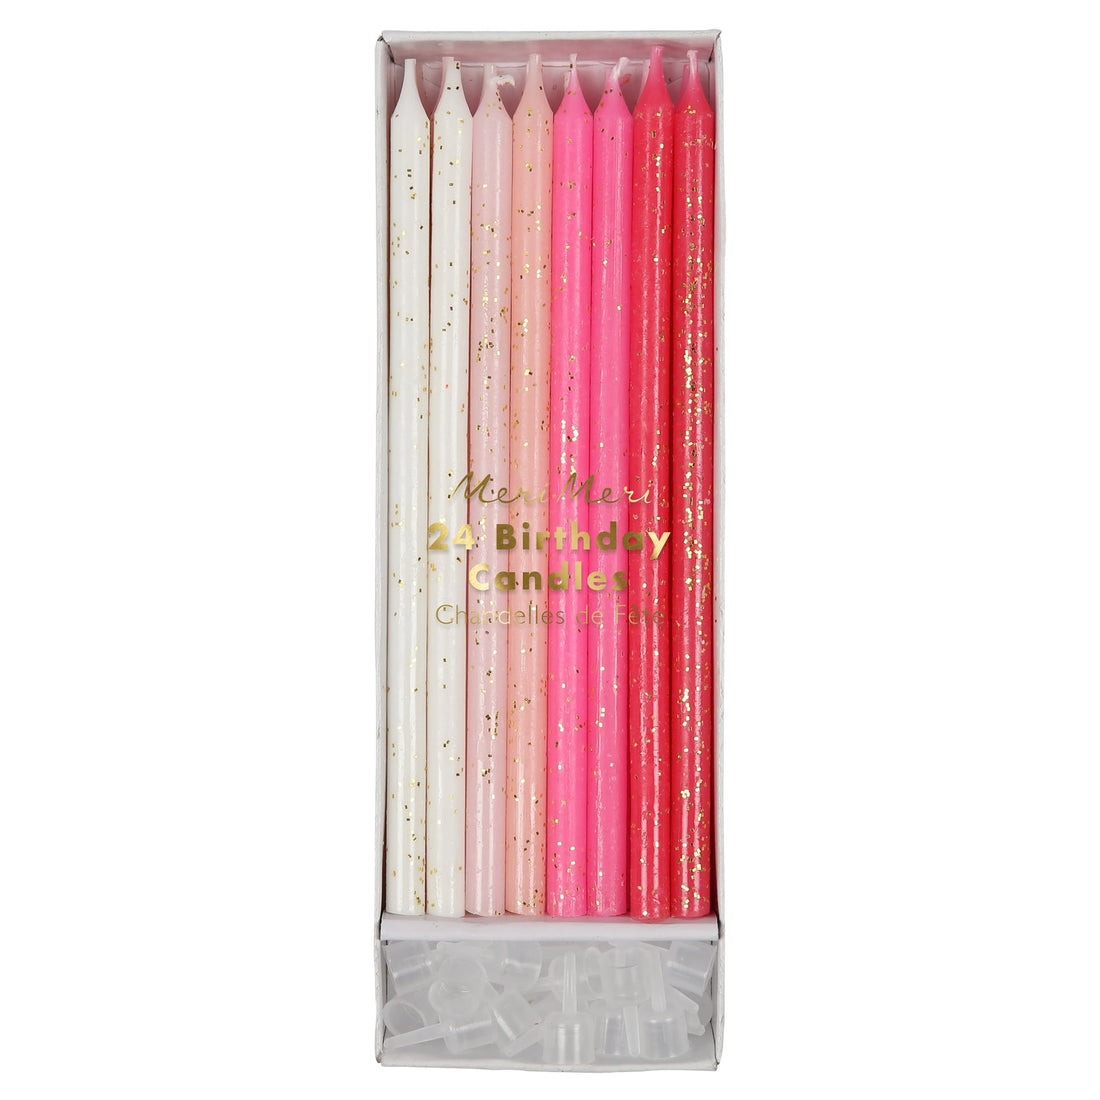 A set of Meri Meri Pink Glitter Colored Birthday Candles in a box, perfect for a party.